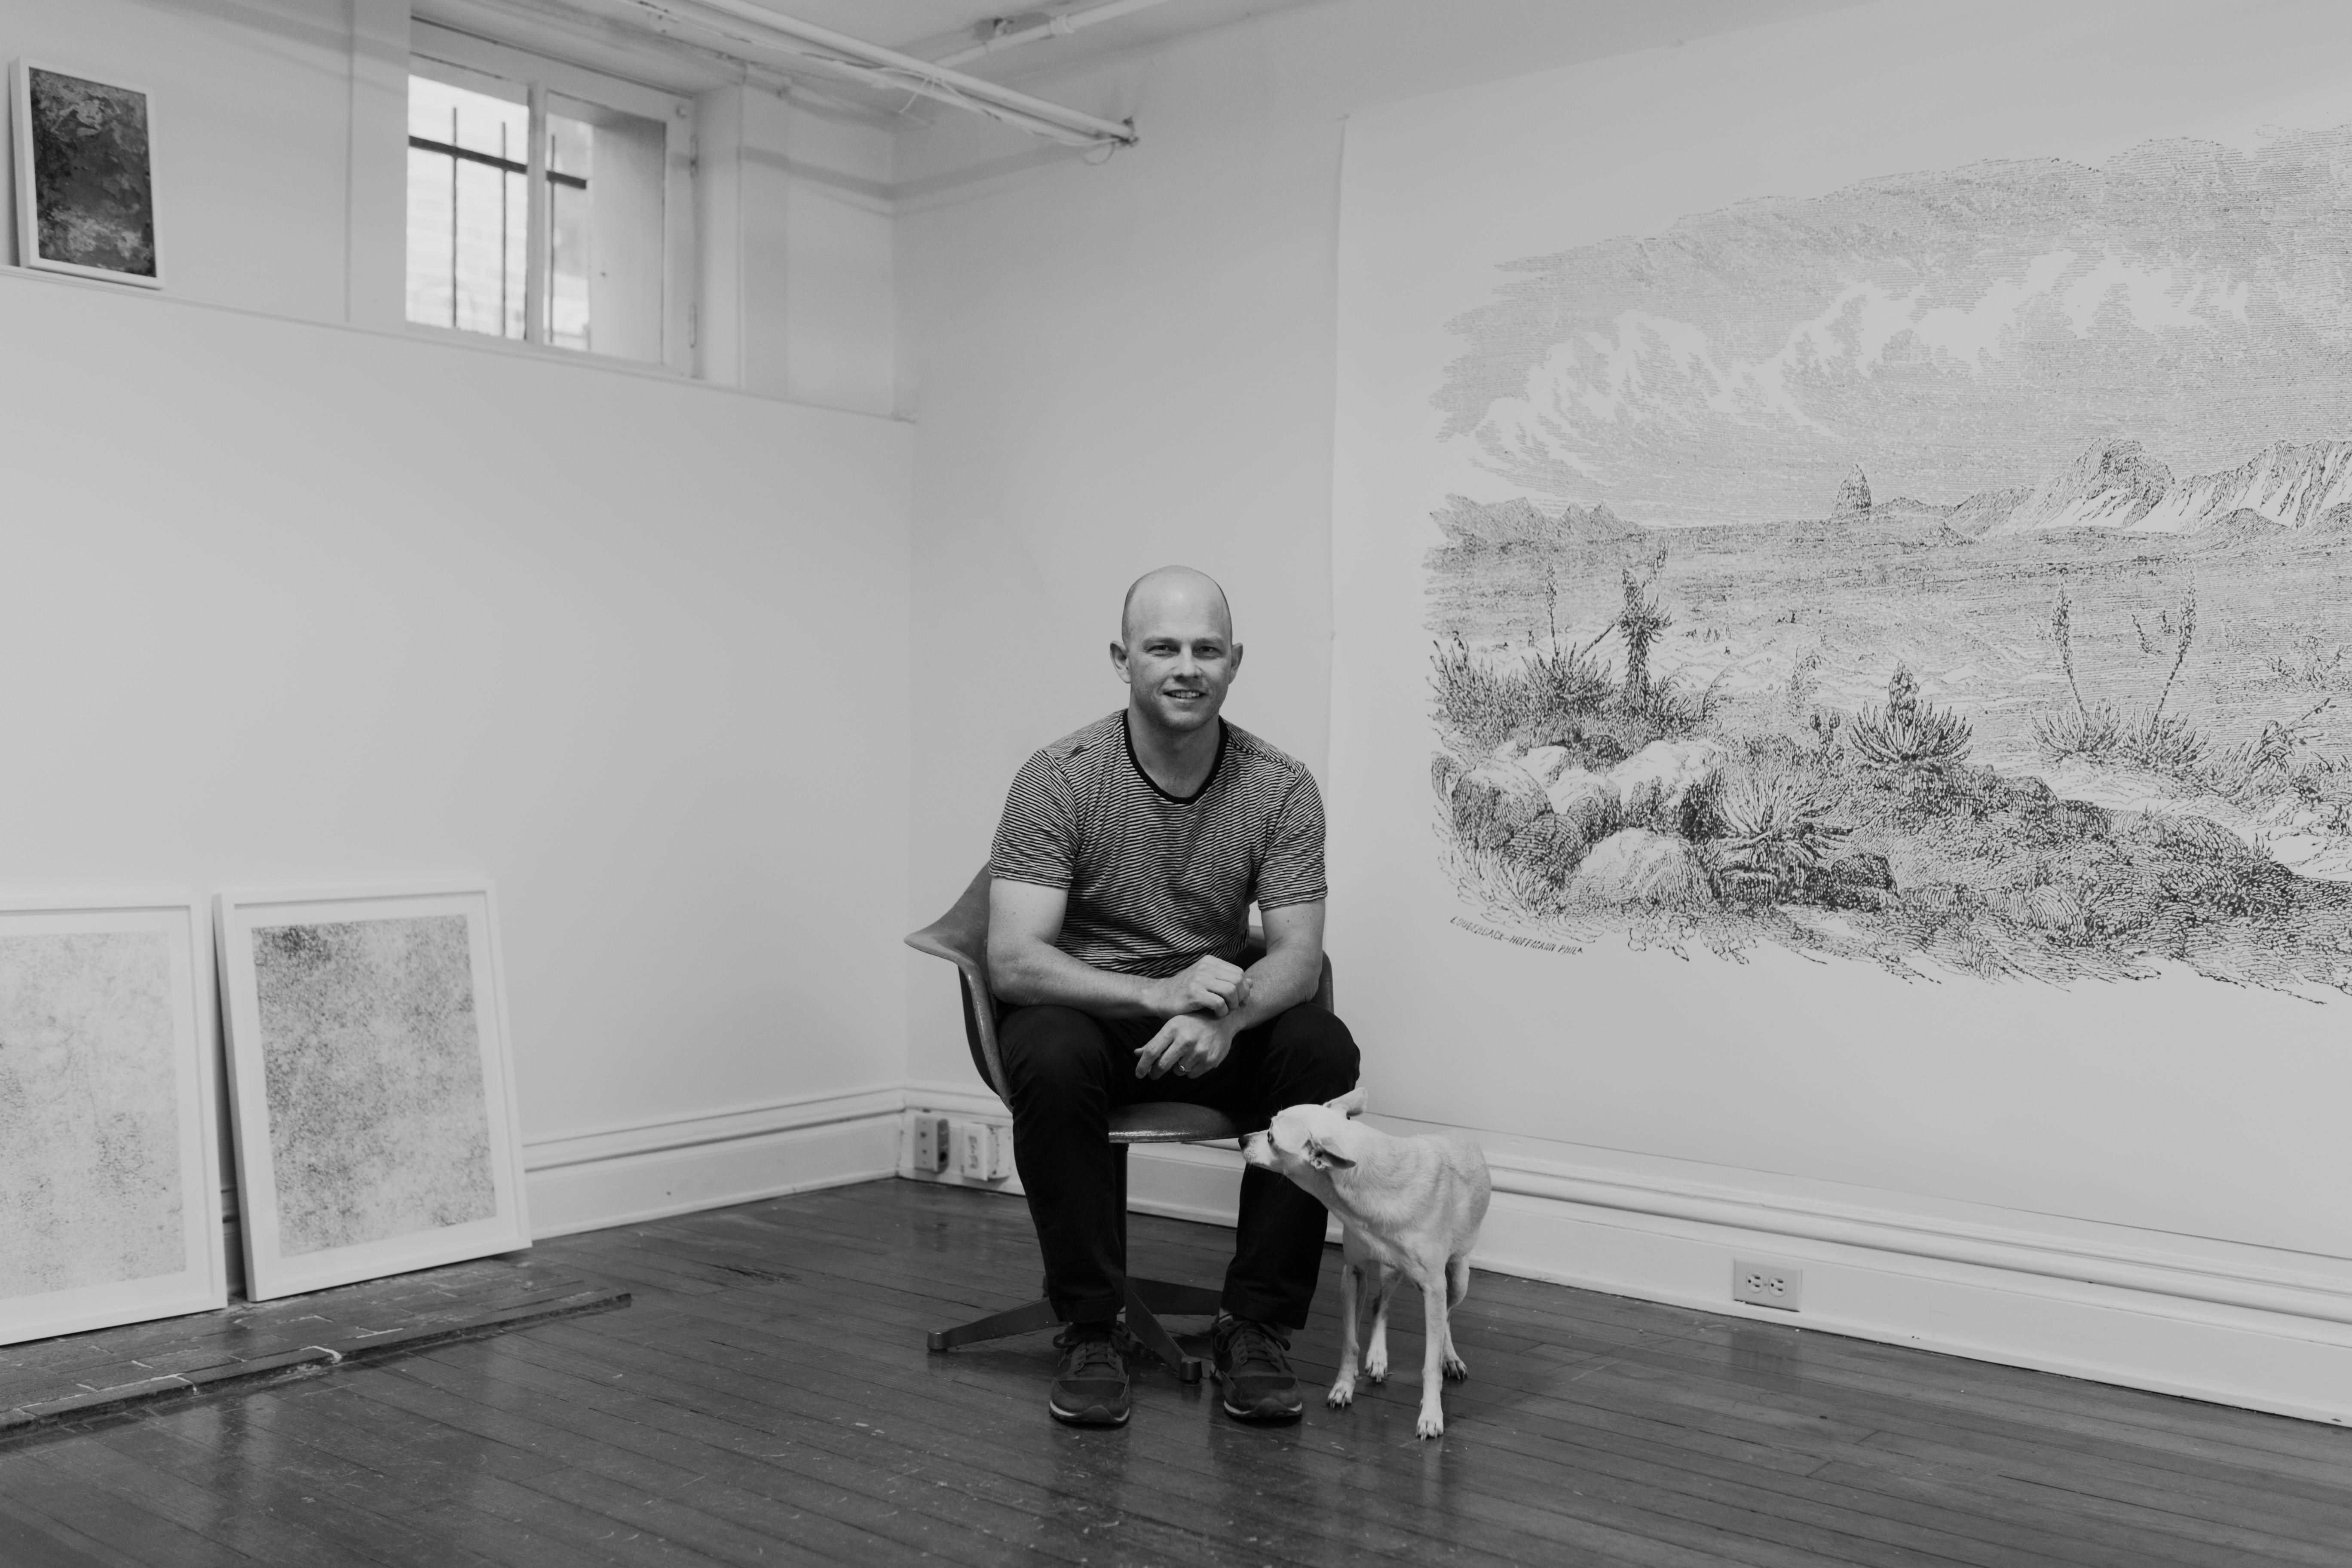 Portrait of Chris Oatey sitting in an indoor space. There is a medium sized white dog by his side. On the wall next to him is a large artwork of an arid landscape. ﻿